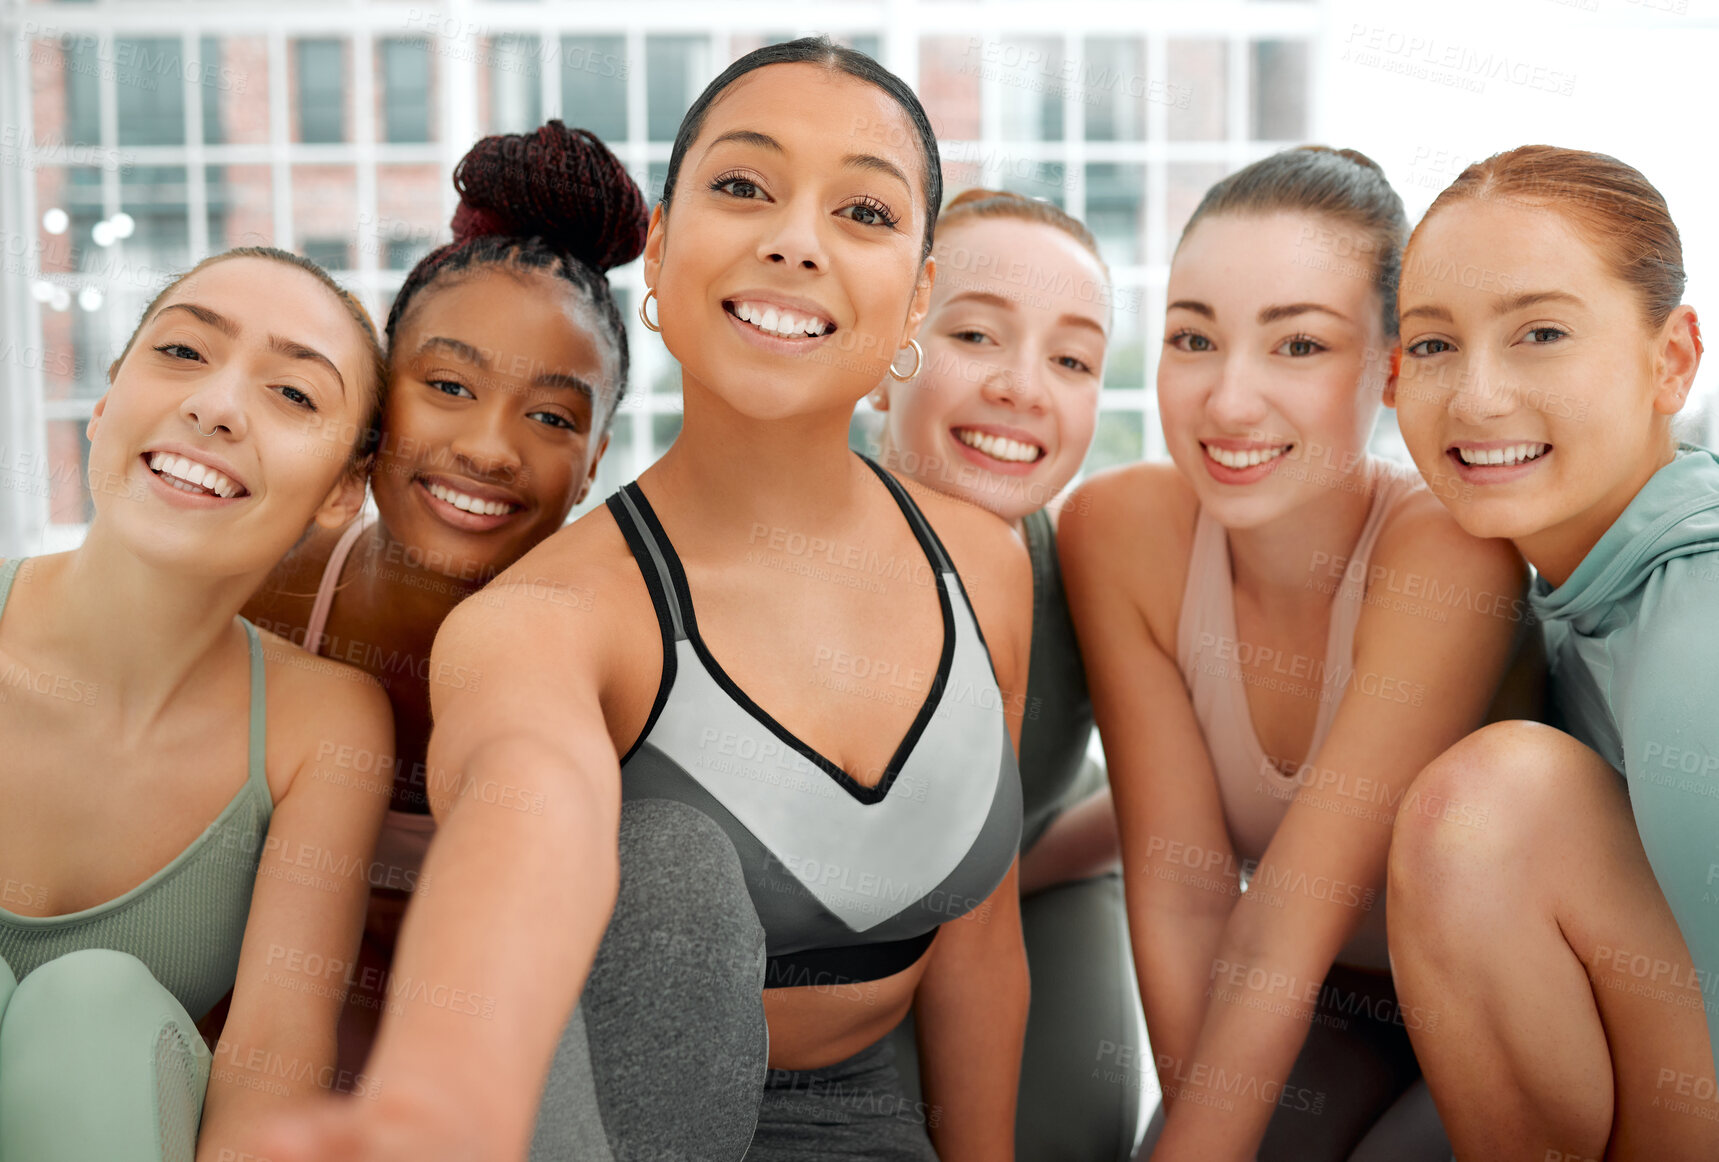 Buy stock photo Shot of a fitness group posing together